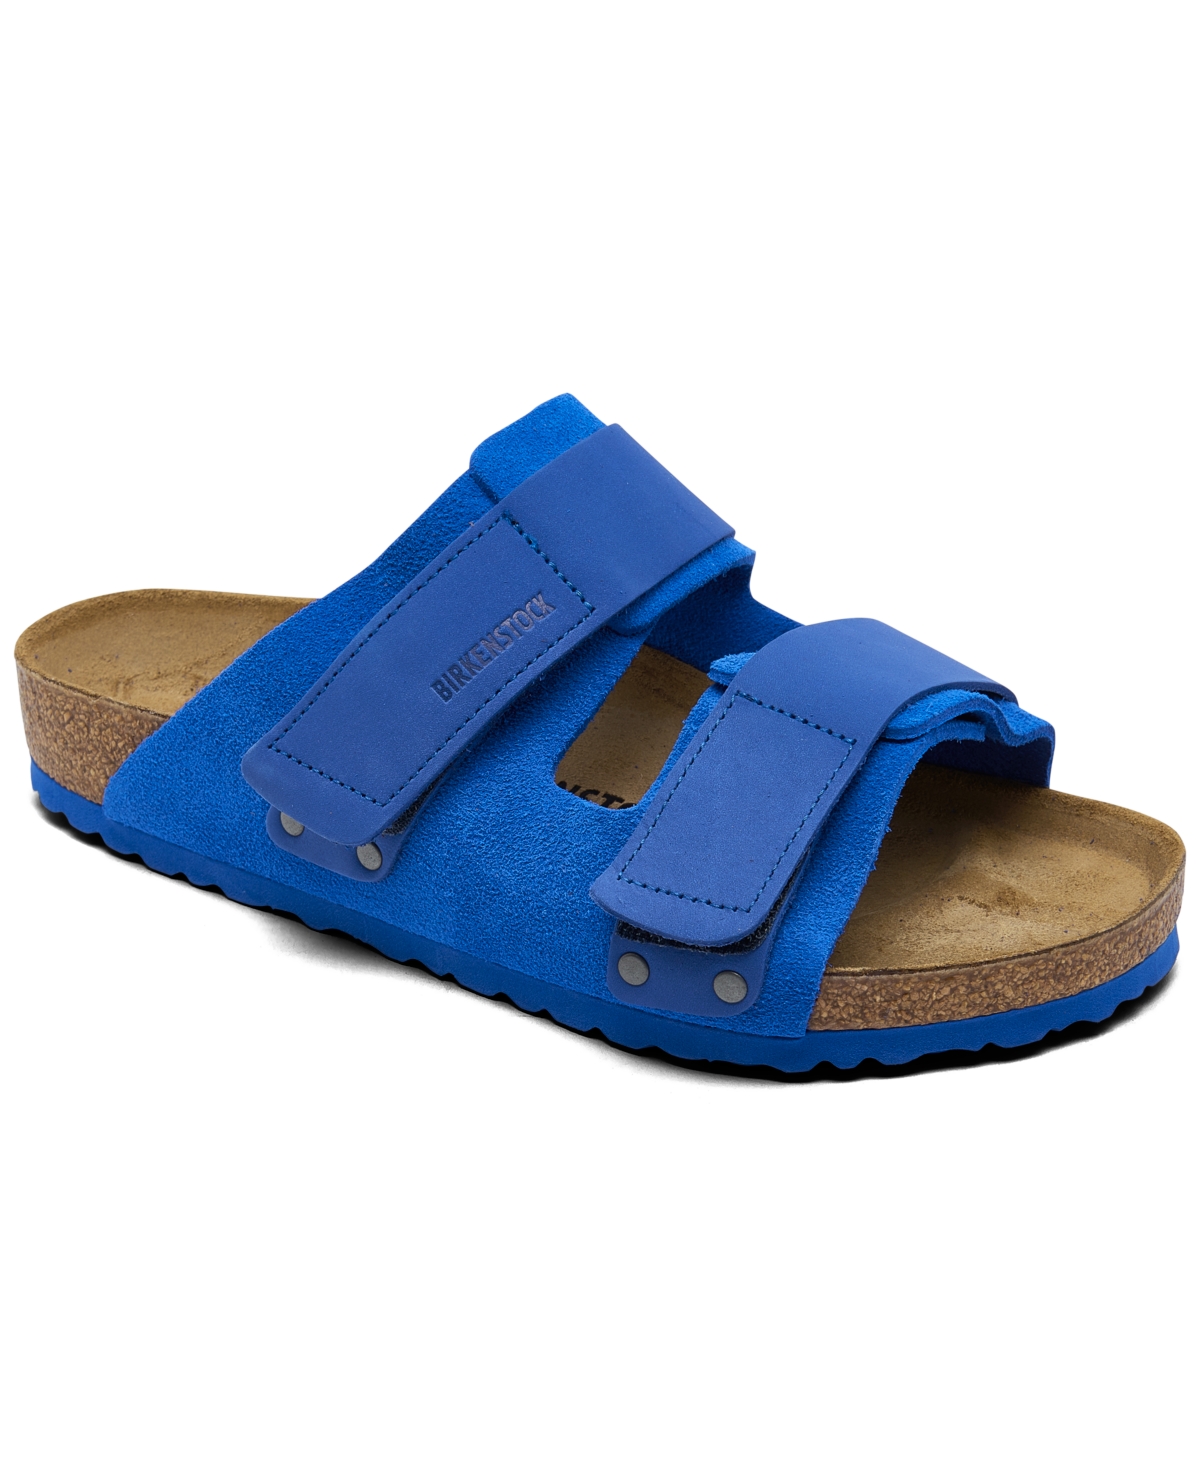 Men's Uji Nubuck Suede Leather Sandals from Finish Line - Blue